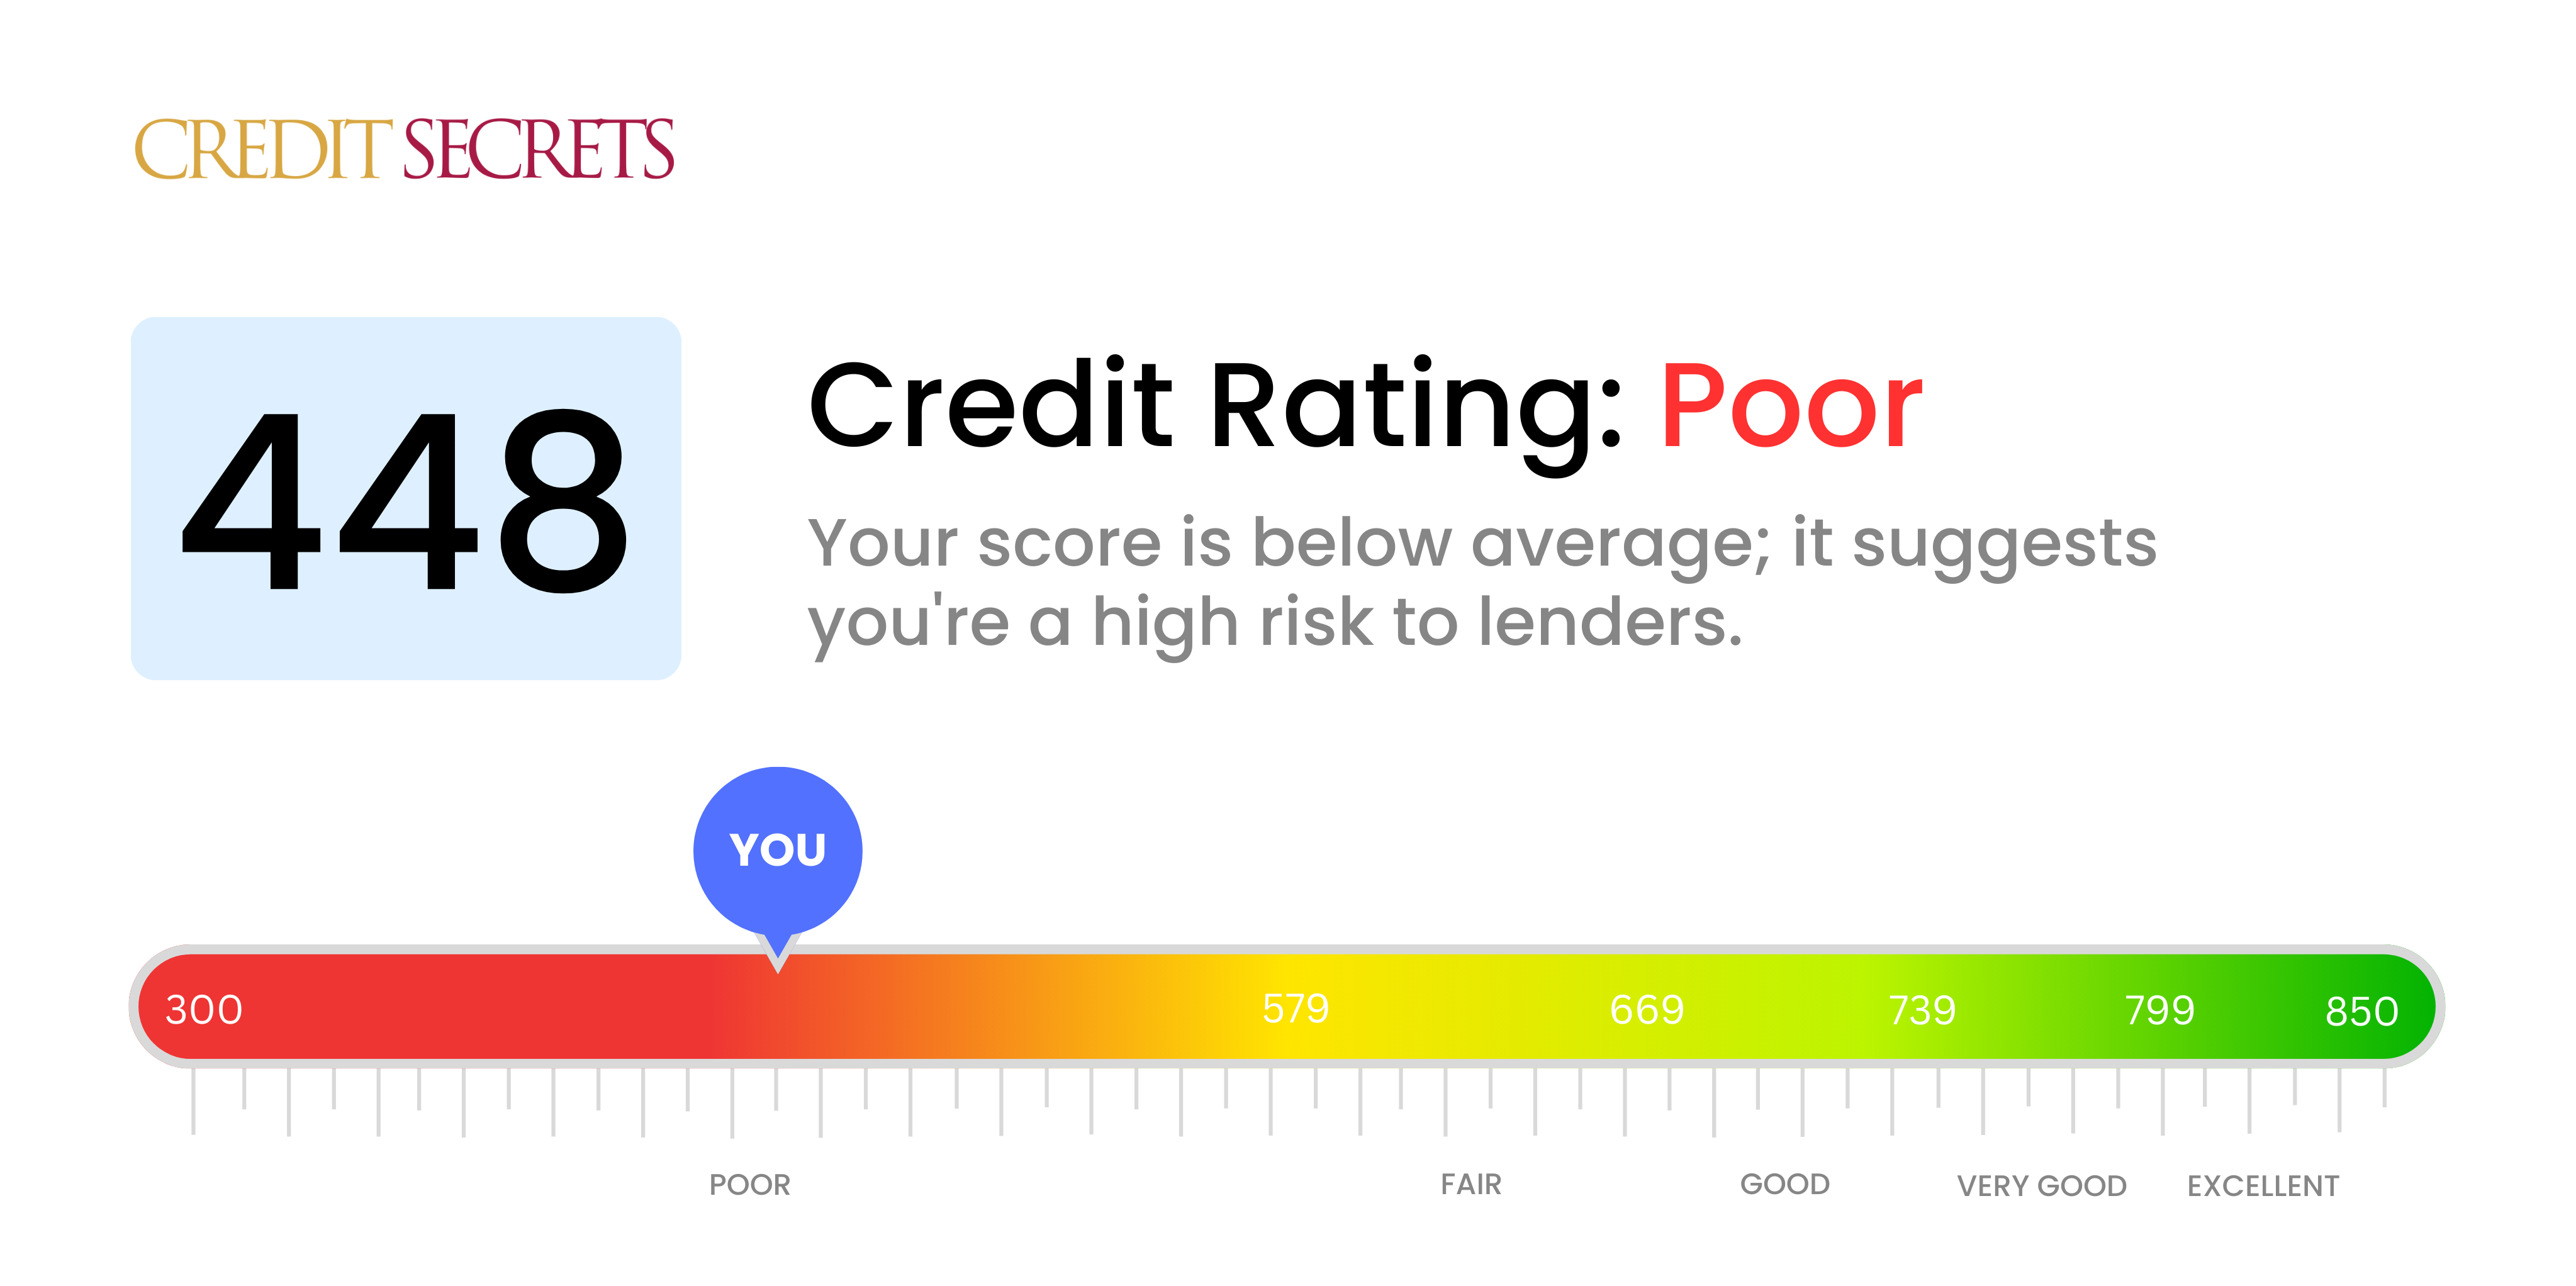 Is 448 a good credit score?